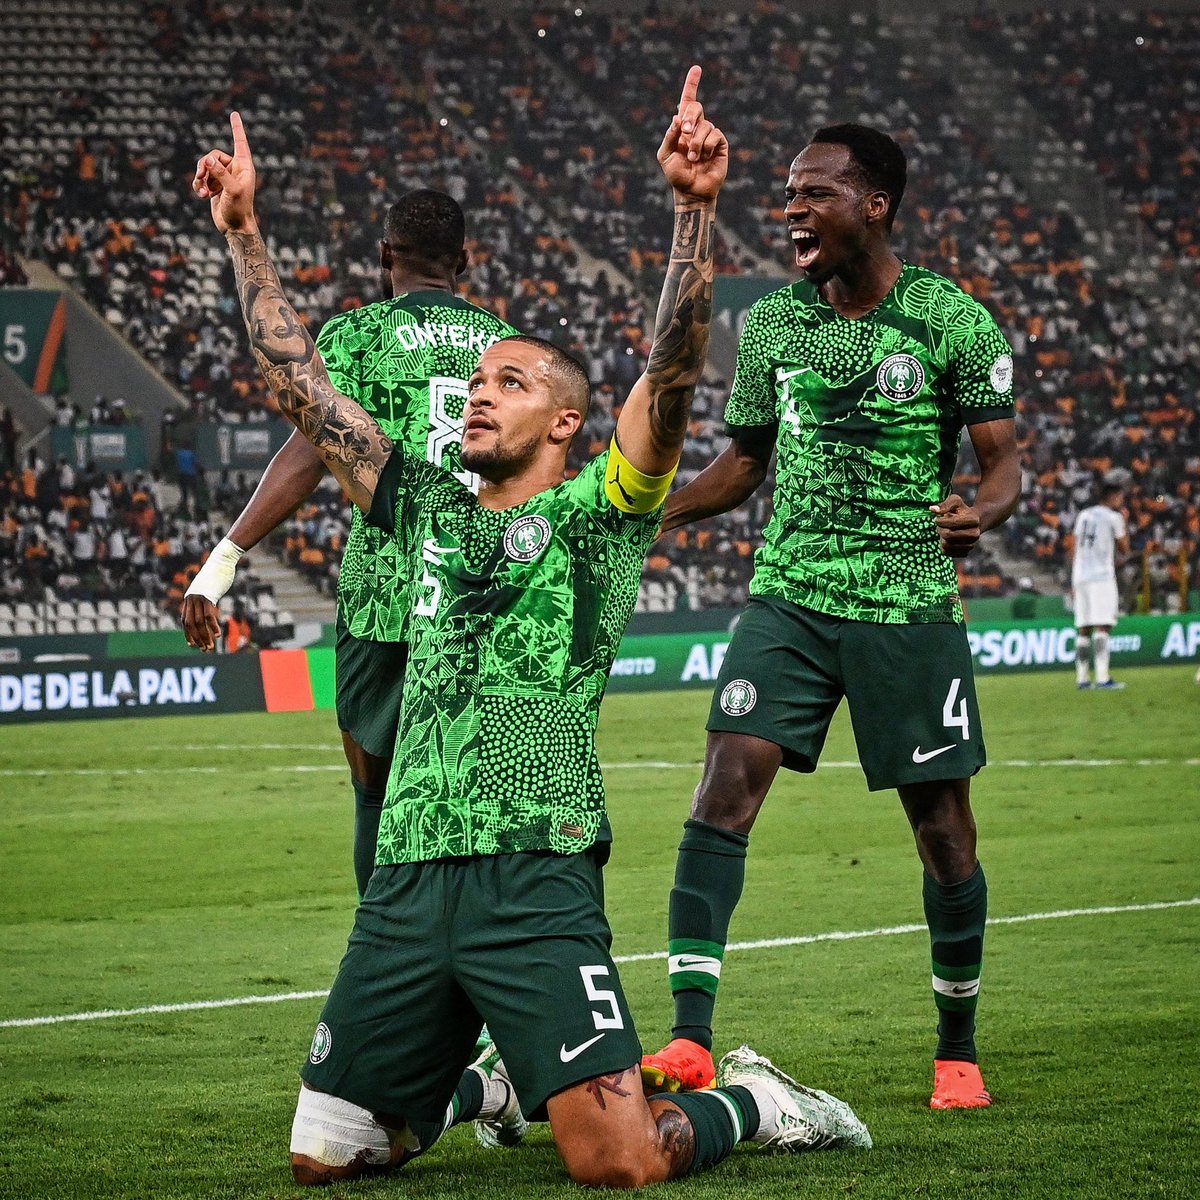 ONE NATION. ONE DREAM. #AFCON2023 FINAL! 🇳🇬